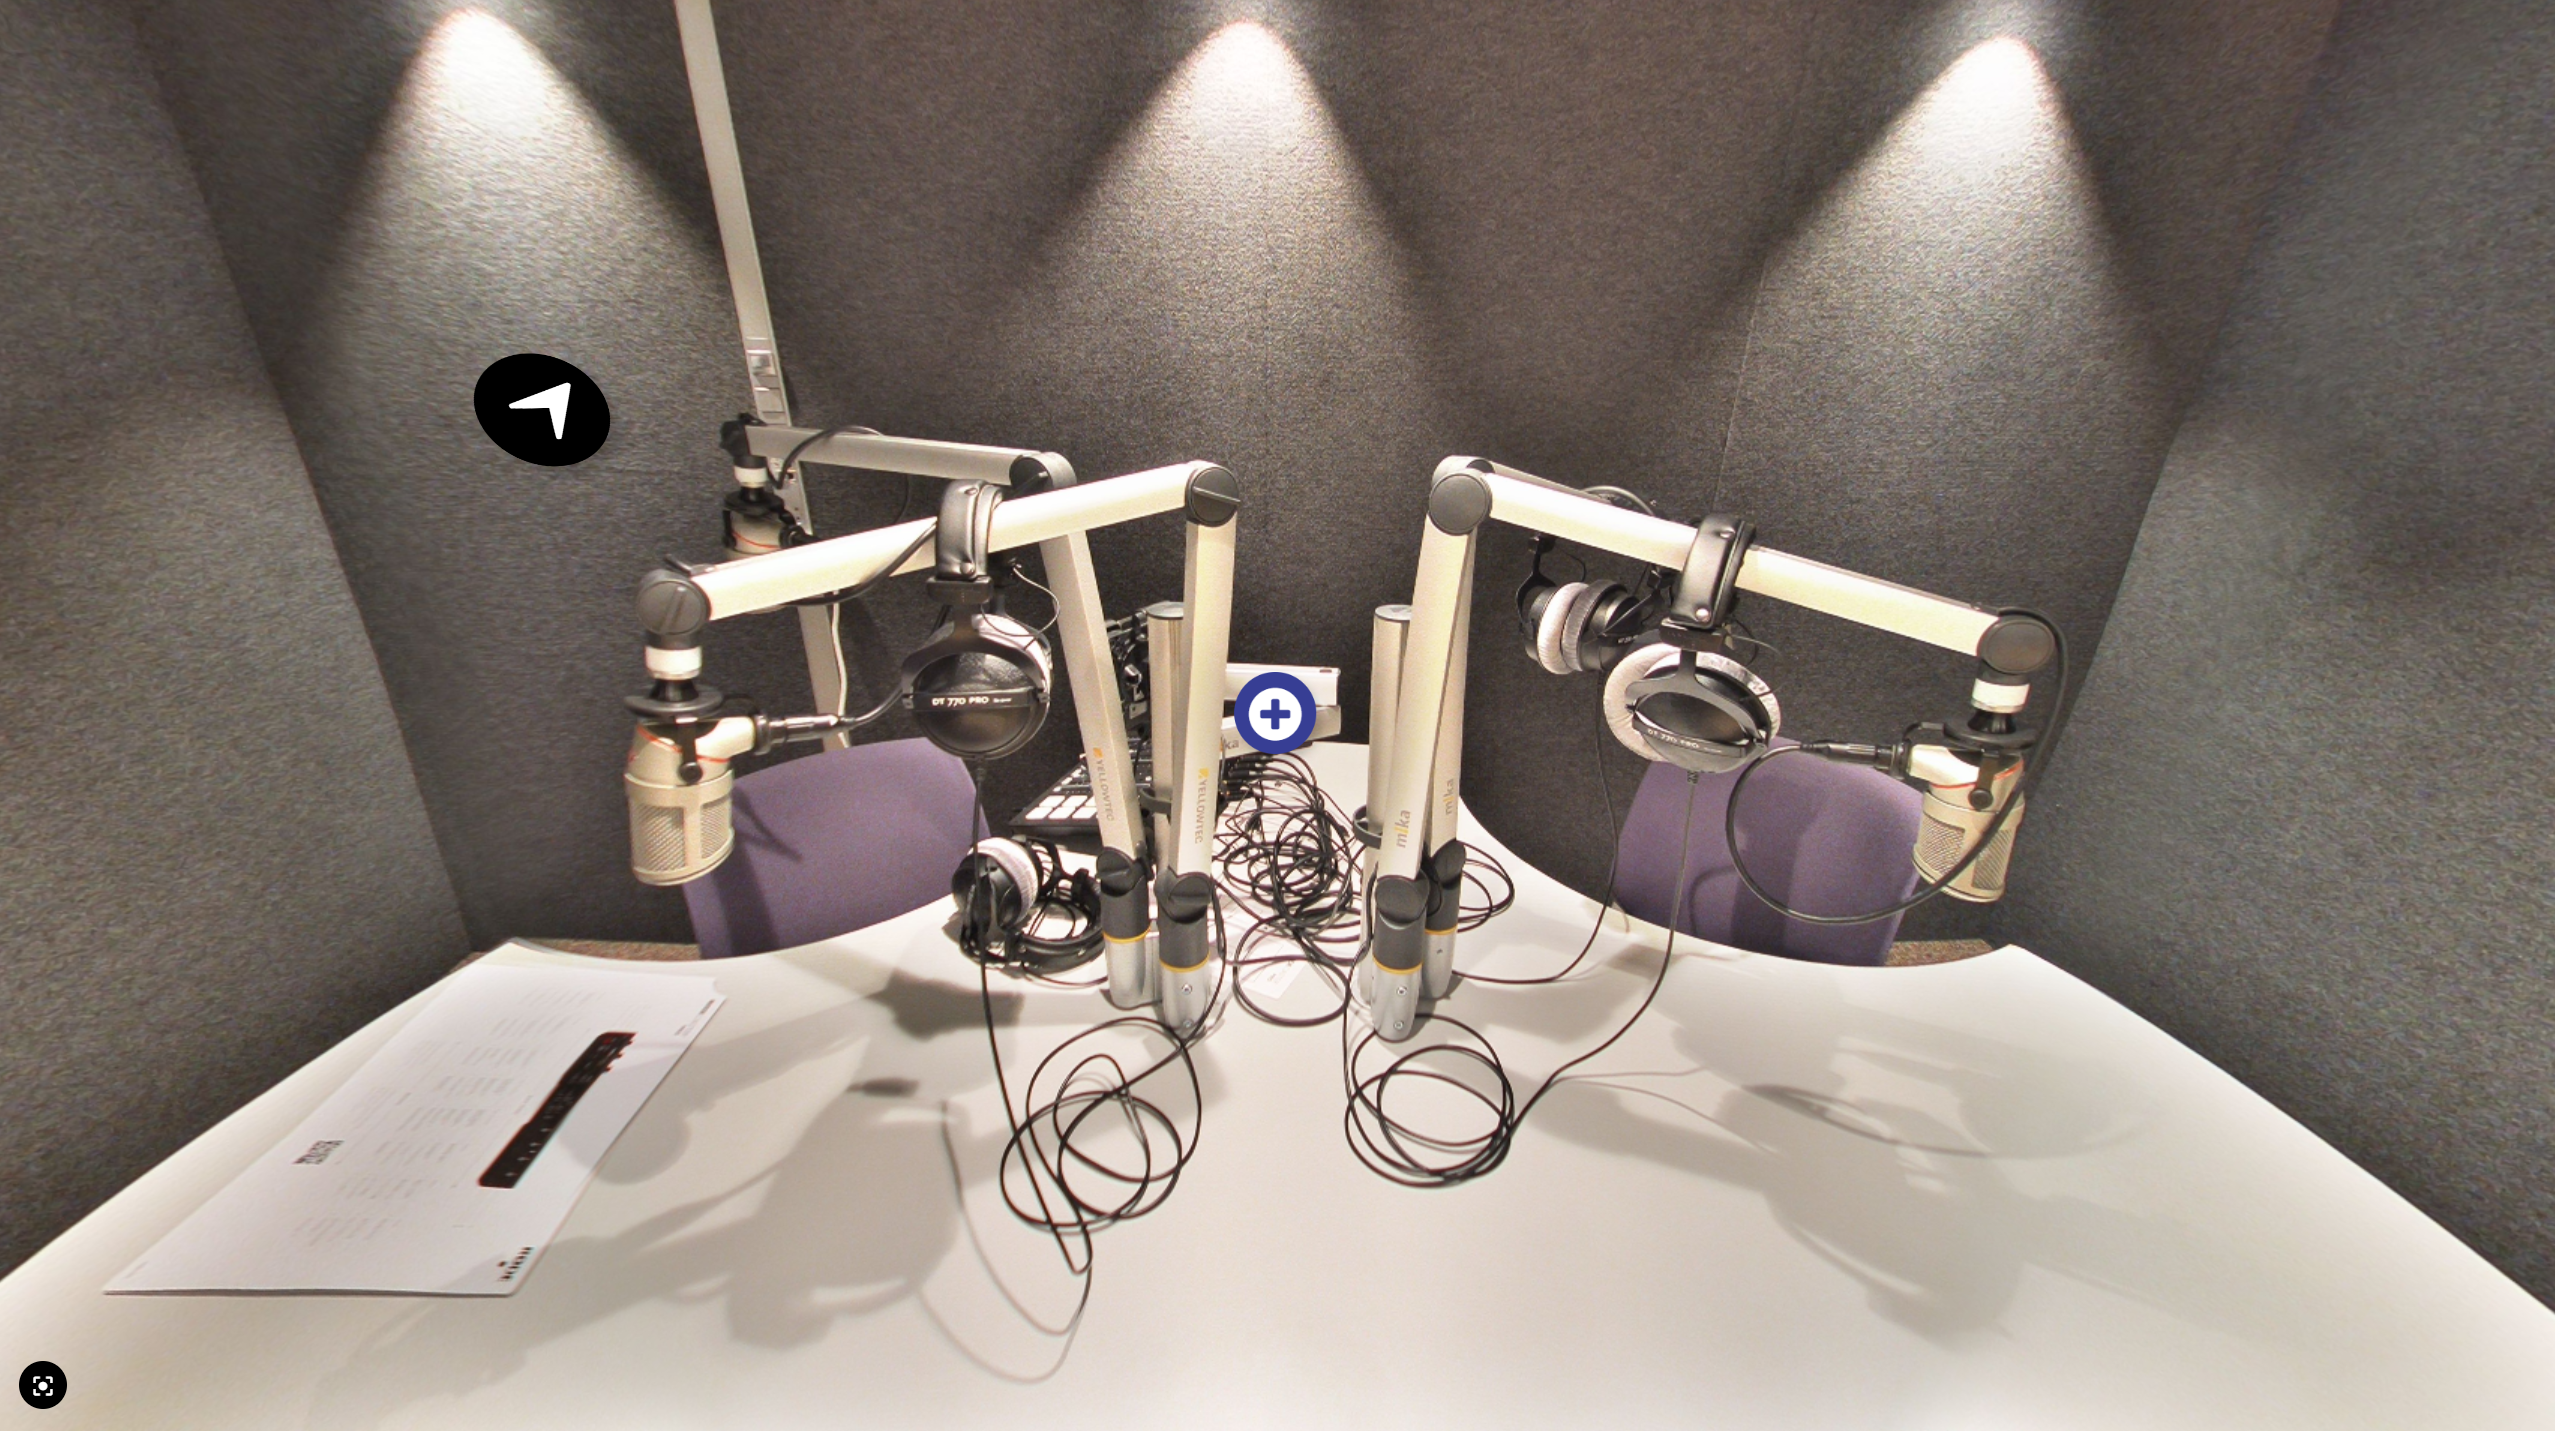 Picture showing the set up of the CastPod lyd podcast studio.